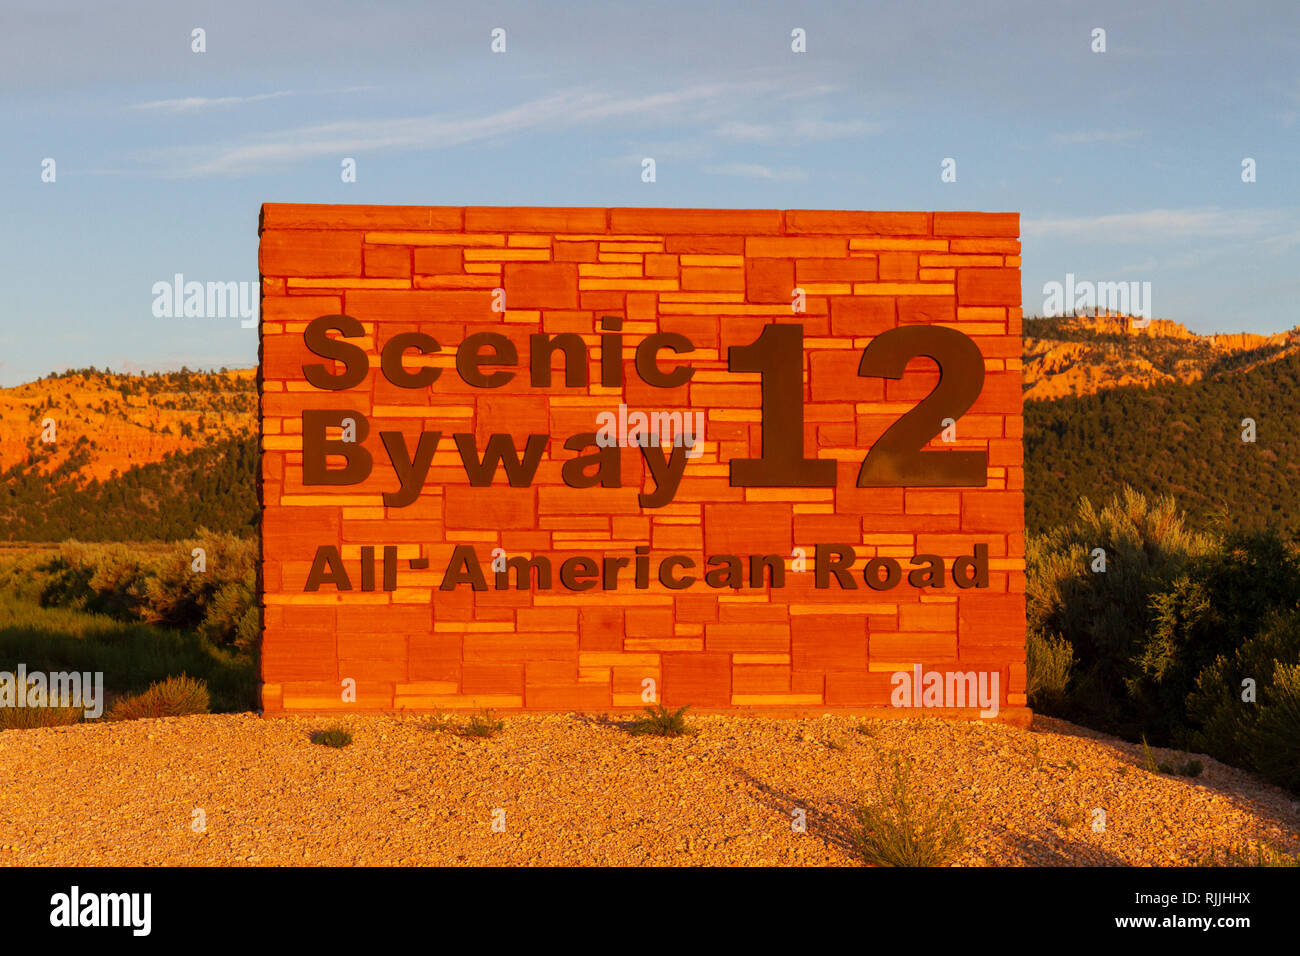 Scenic Byway 12, tous les American Road sign menant à Red Canyon, Dixie National Forest dans l'Utah, United States. Banque D'Images